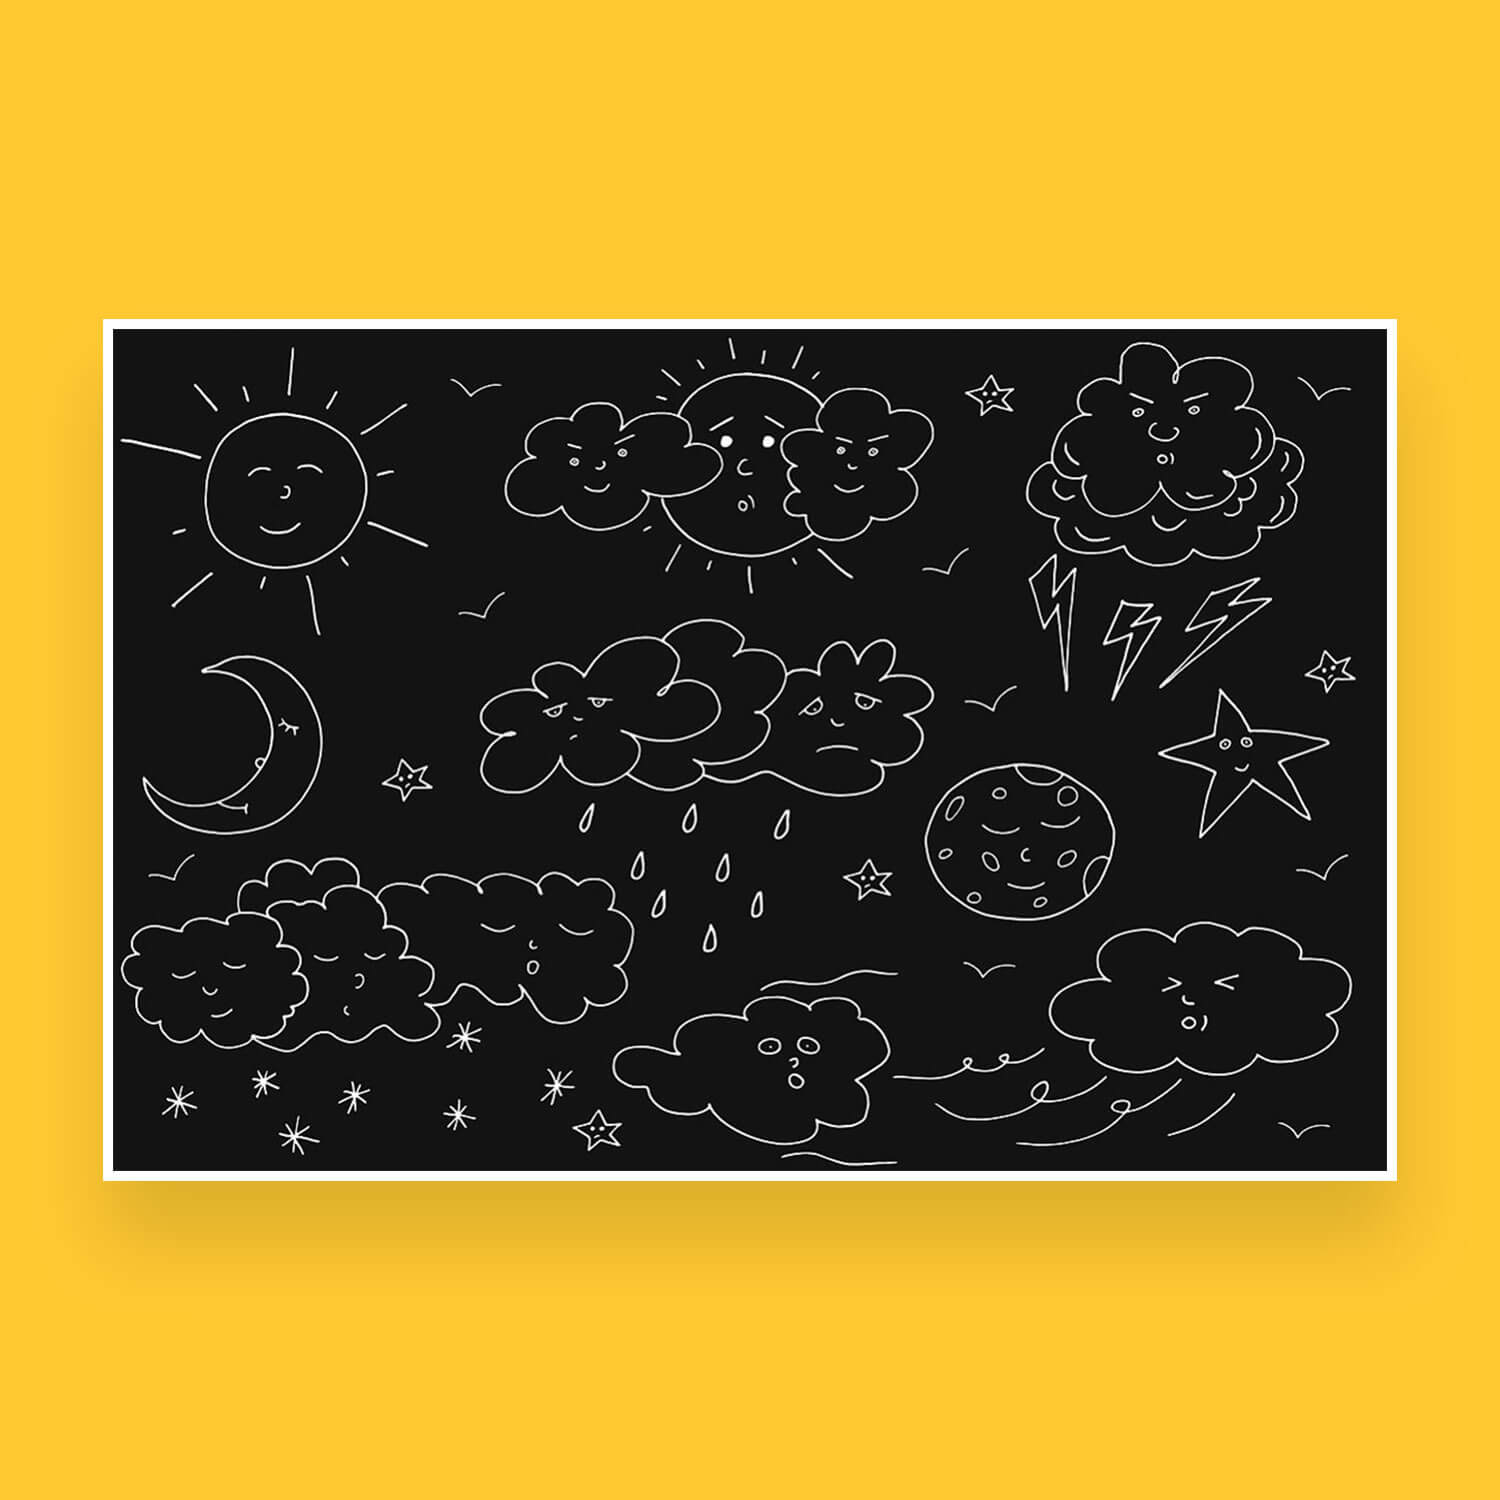 Sets of weather phenomena hand drawn doodles on a black background.